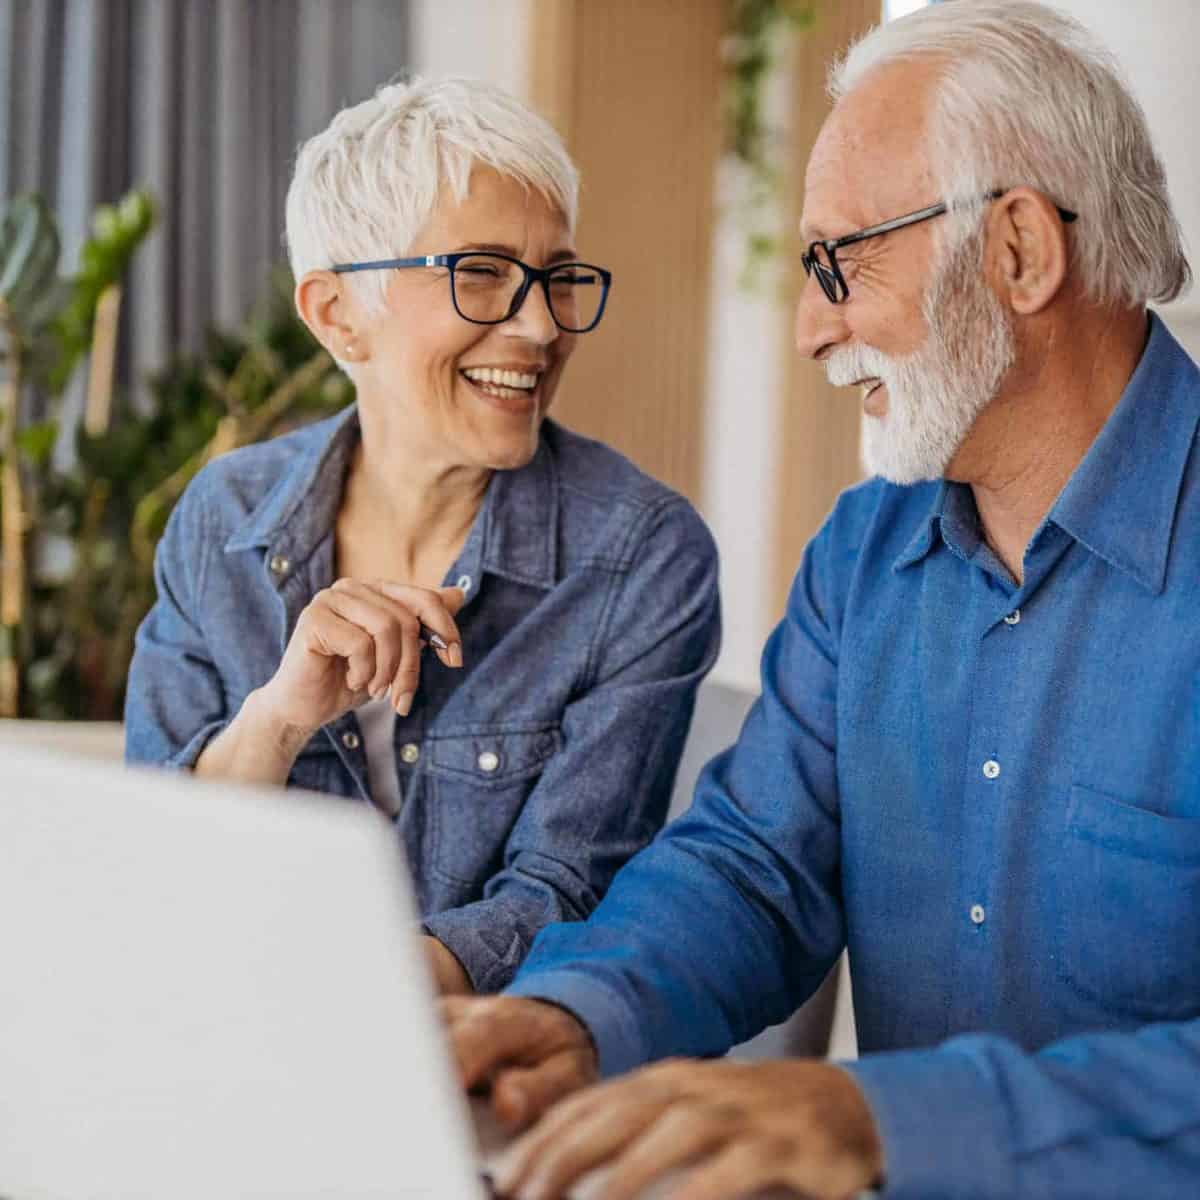 Columbus Precious Metals IRA & Investing Company Copy of Senior couple at laptop smiling GettyImages 1323096524 1200x1200 1